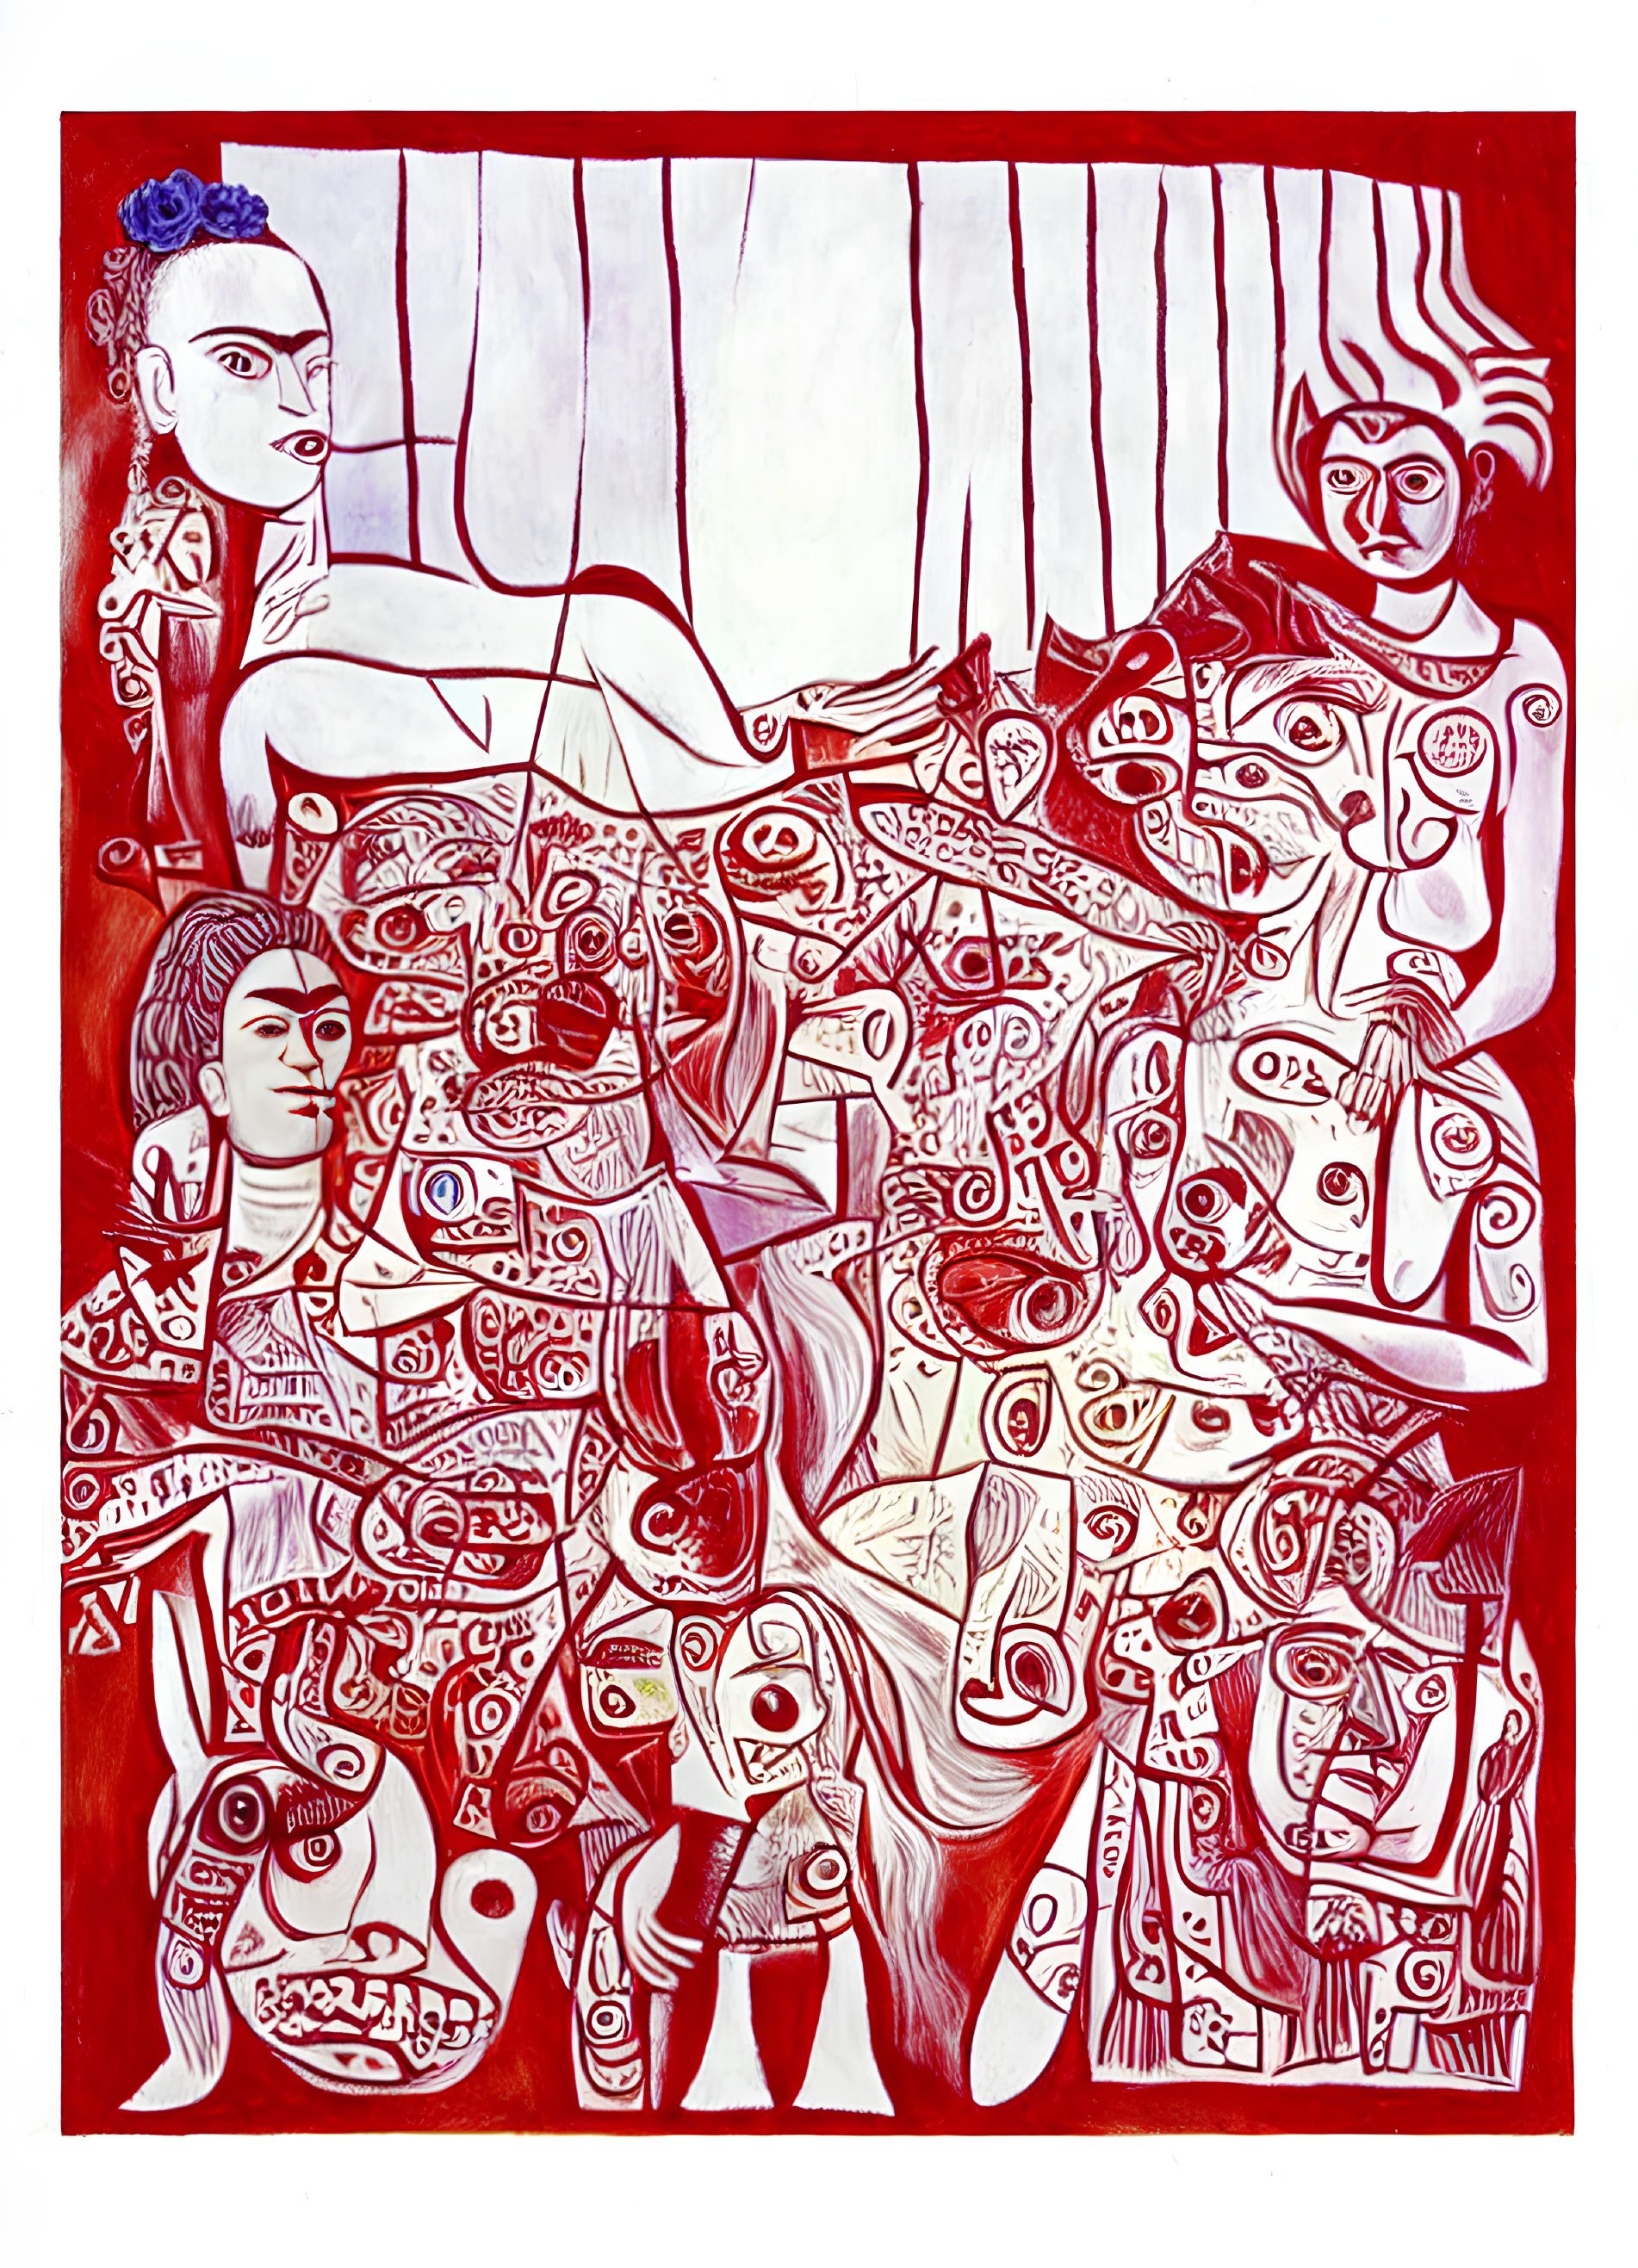 Abstract painting with stylized human figures and faces in red and white against a patterned background